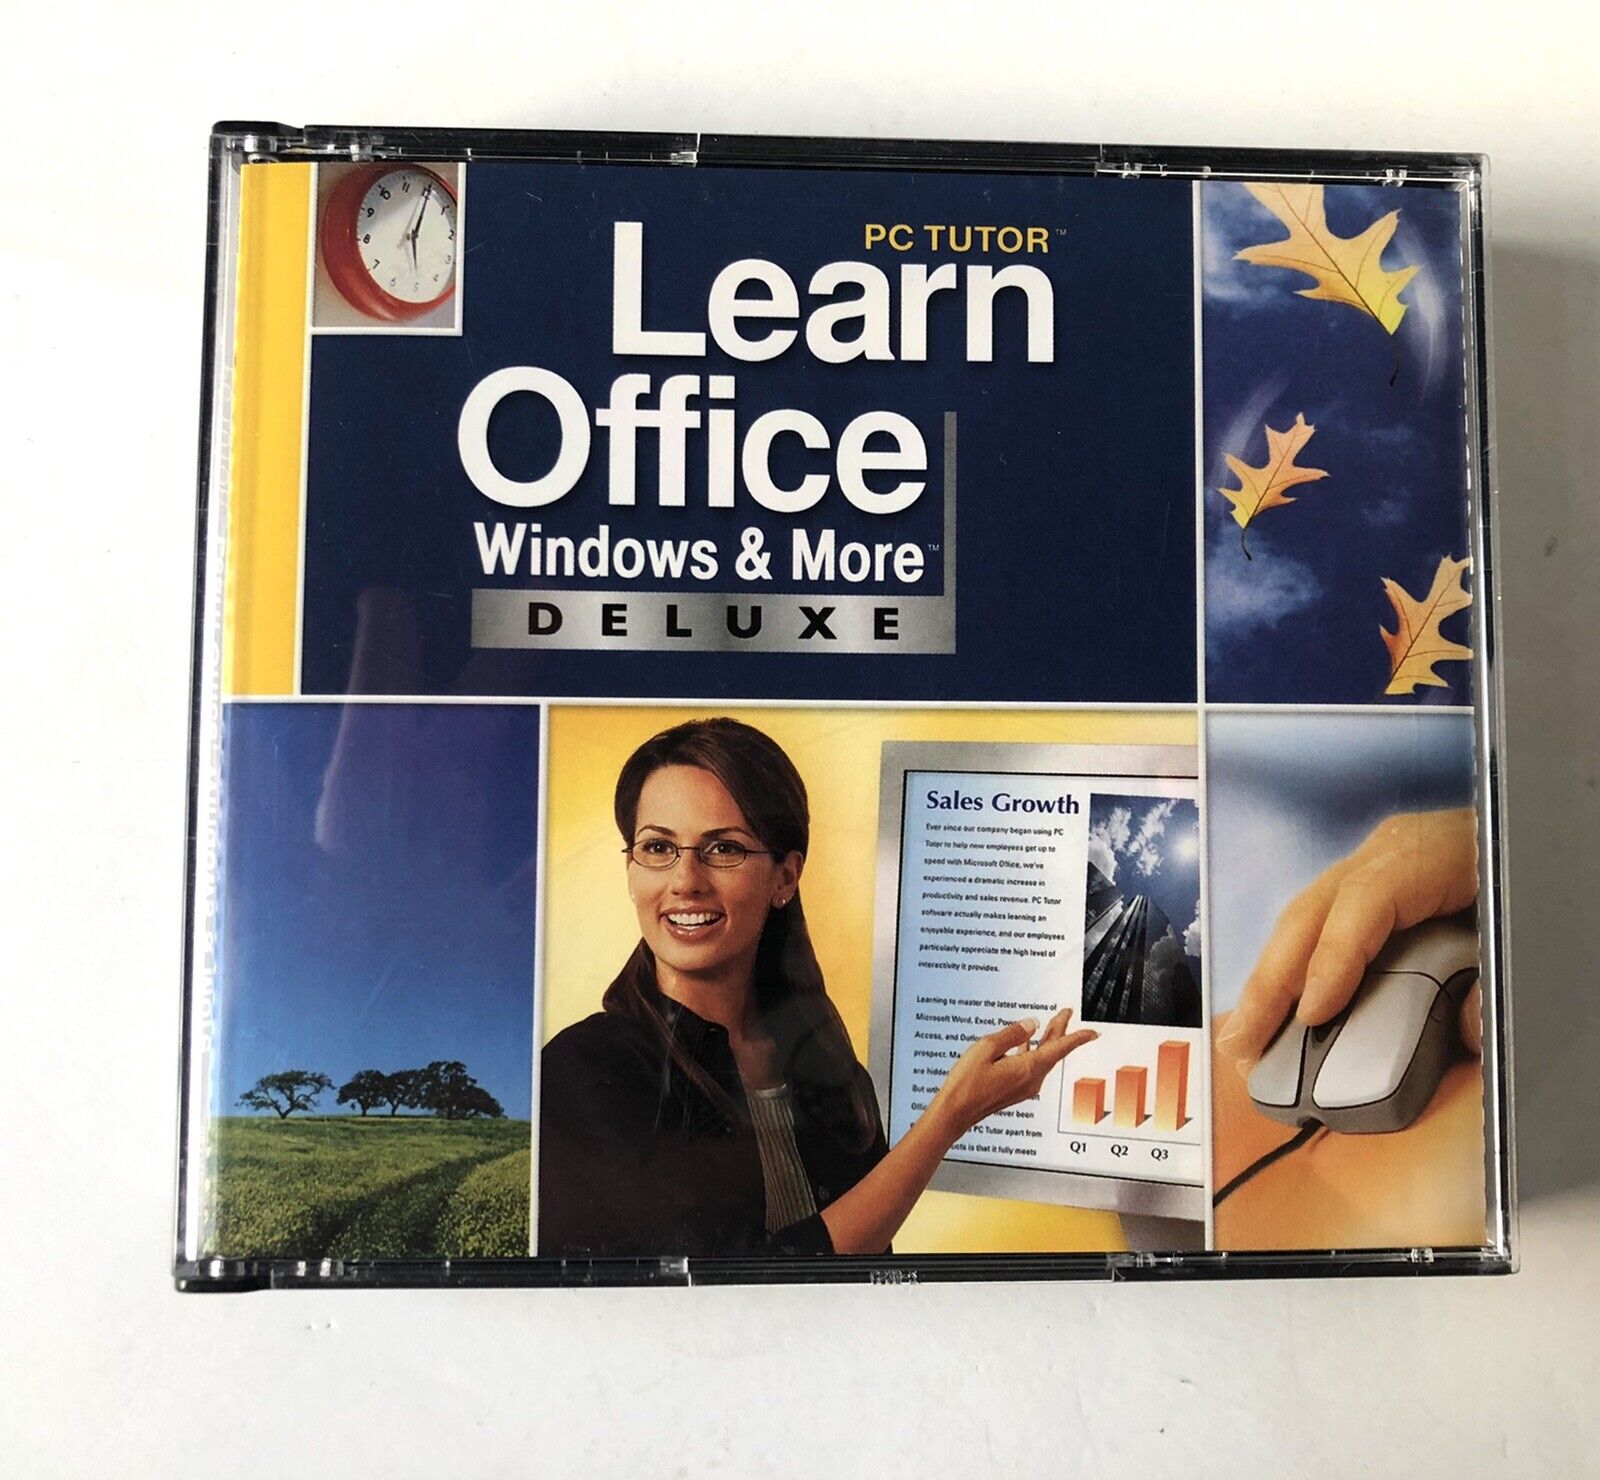 PC Tutor Learn Office Windows & More Deluxe 2004-CD Set Of 5